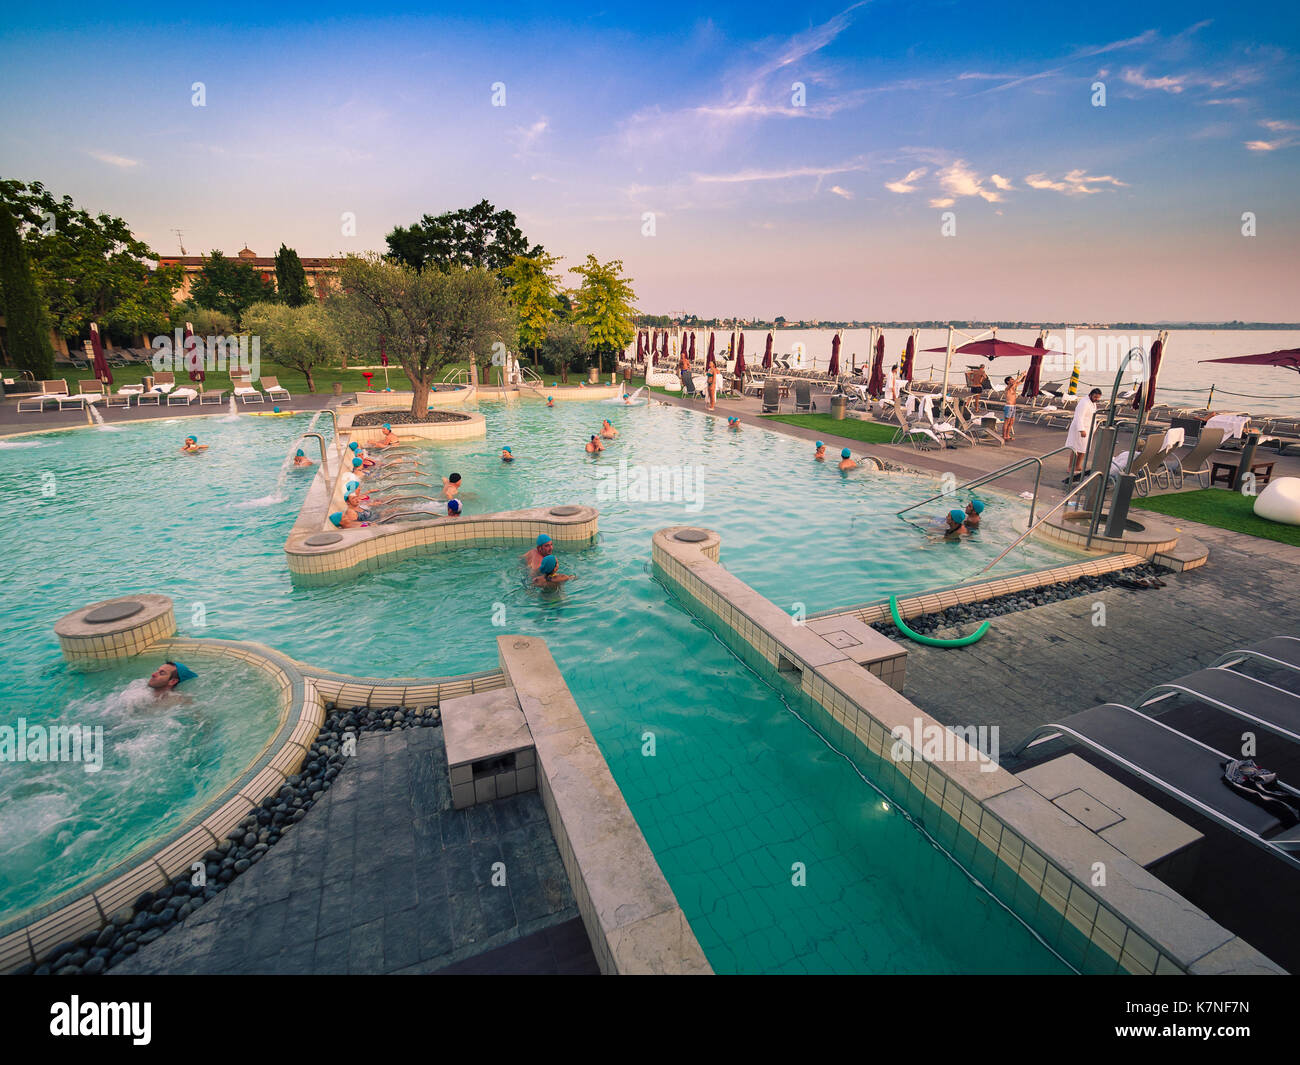 Sirmione Italy August 3 16 Aquaria Is The Thermal Spa Center Stock Photo Alamy